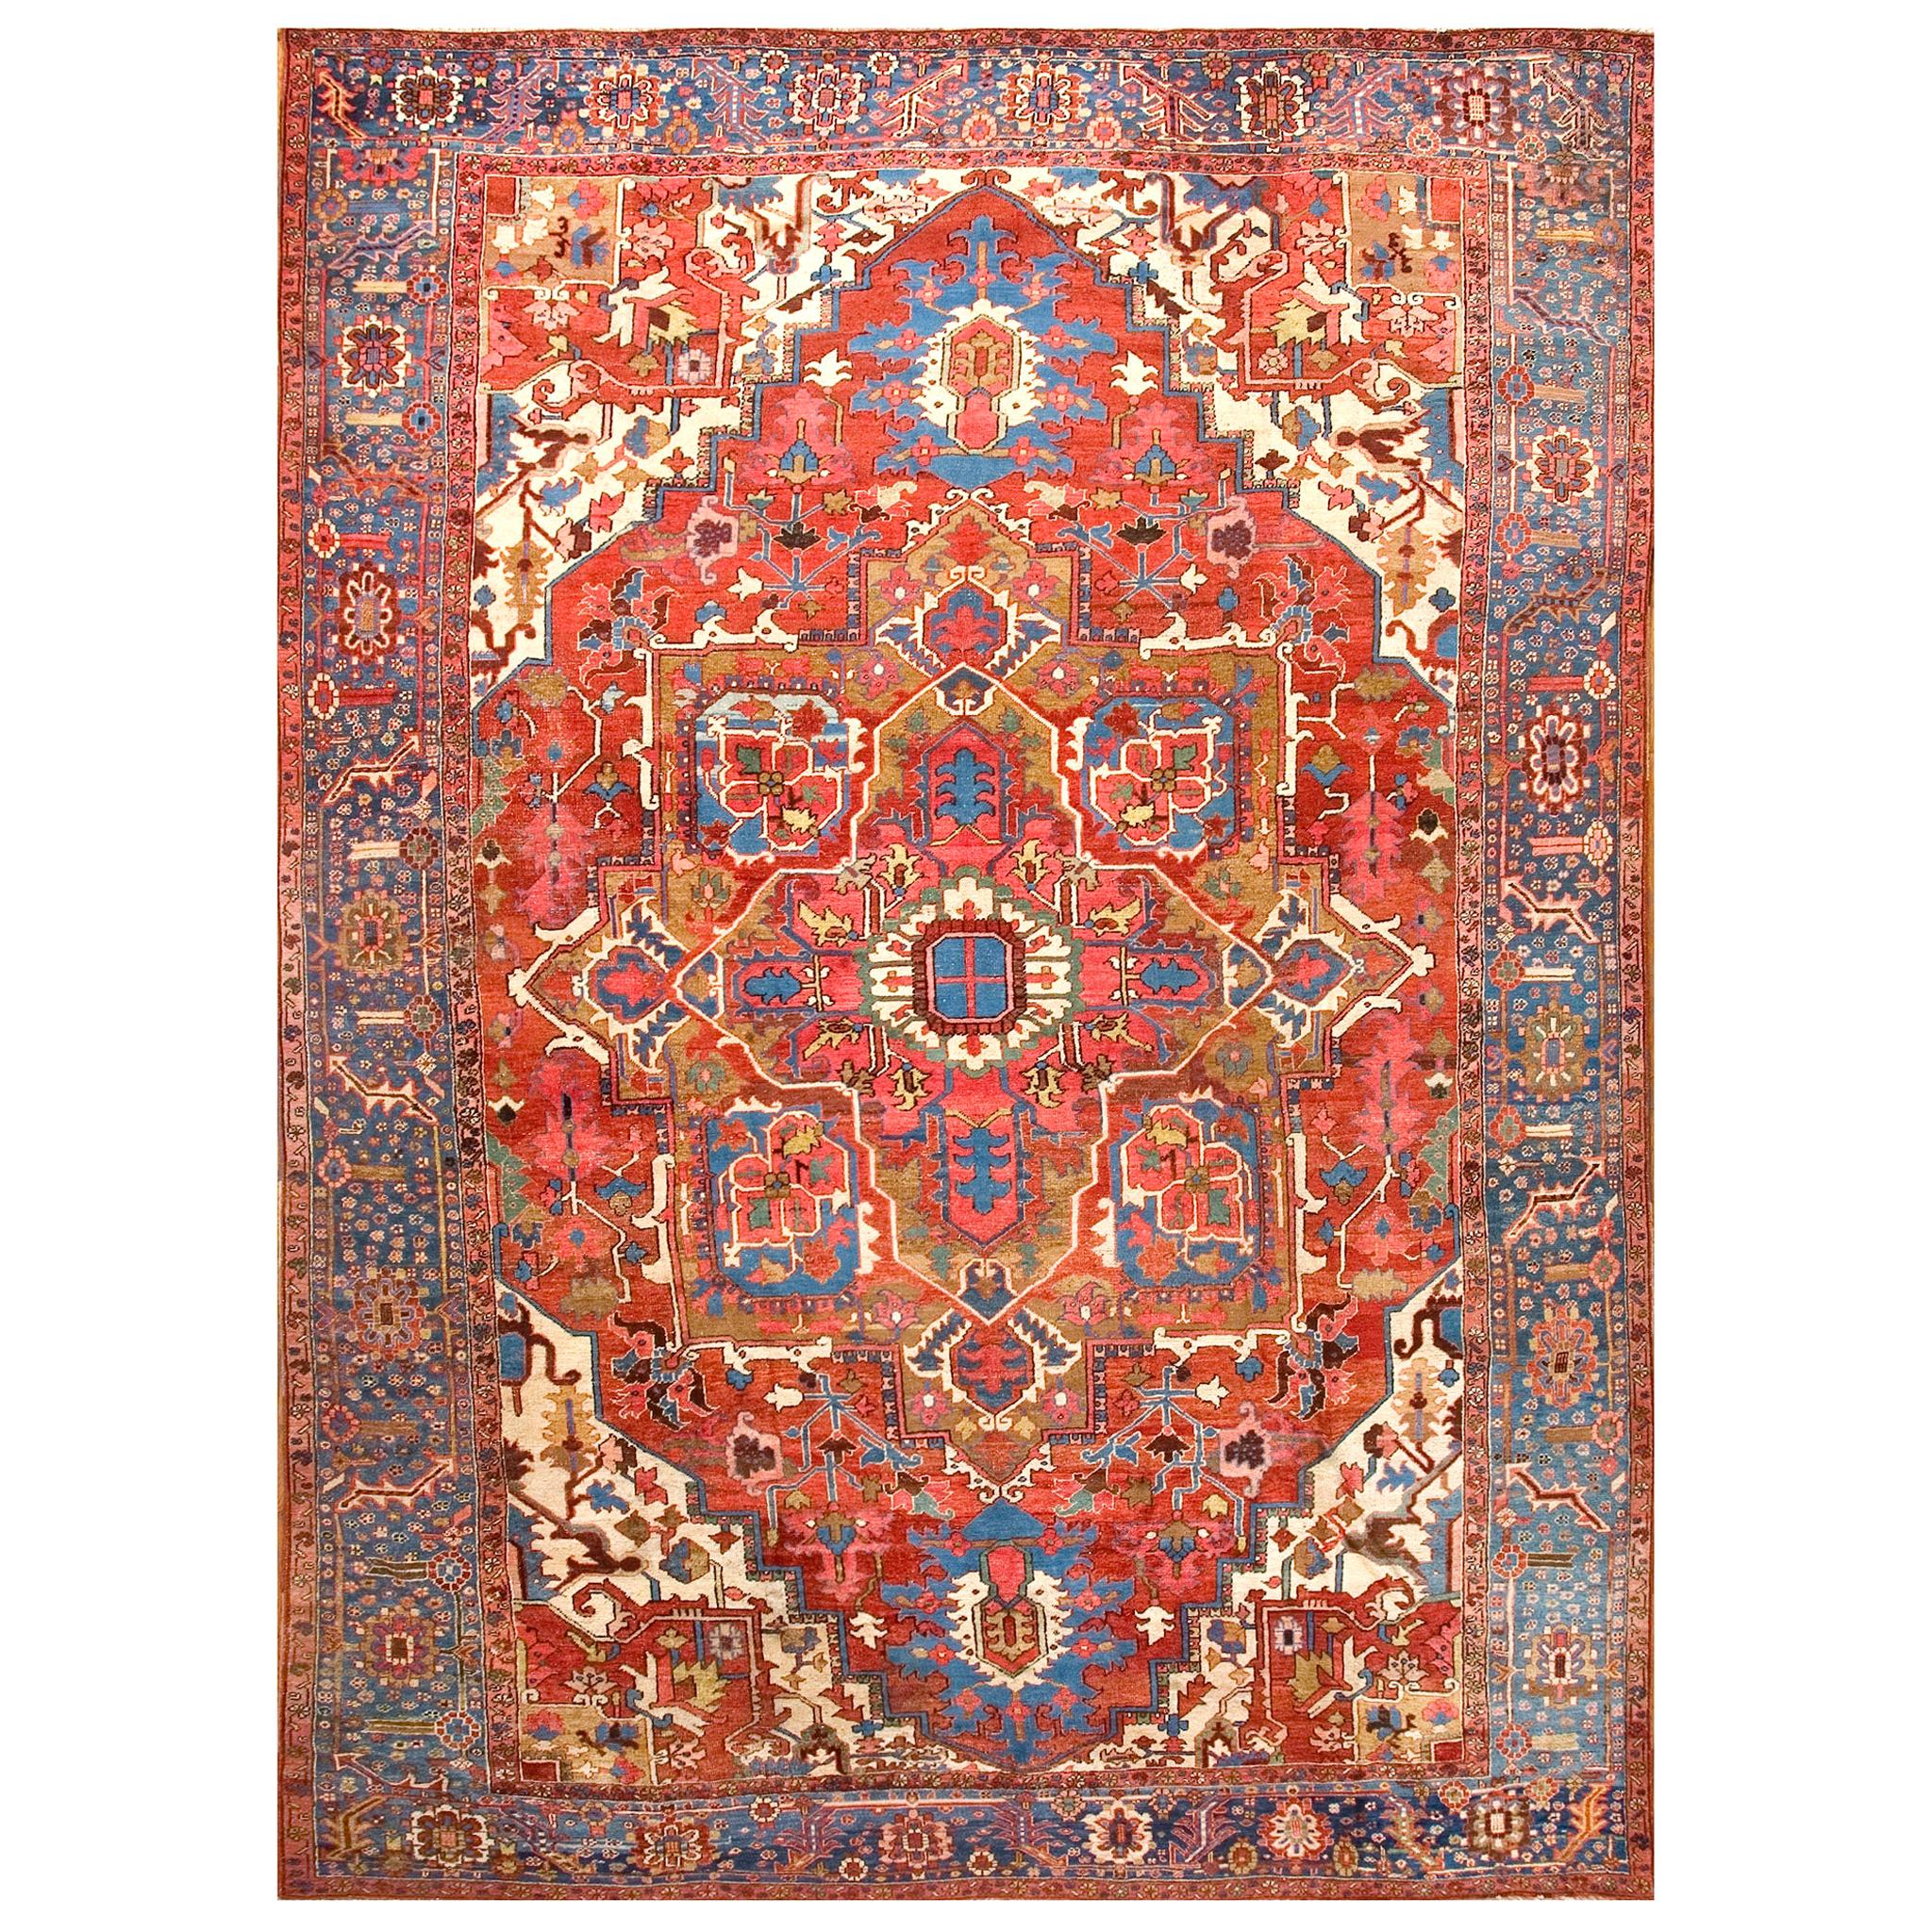 Early 20th Century N.W. Persian Serapi Carpet ( 10' x 14' - 305 x 427 ) For Sale